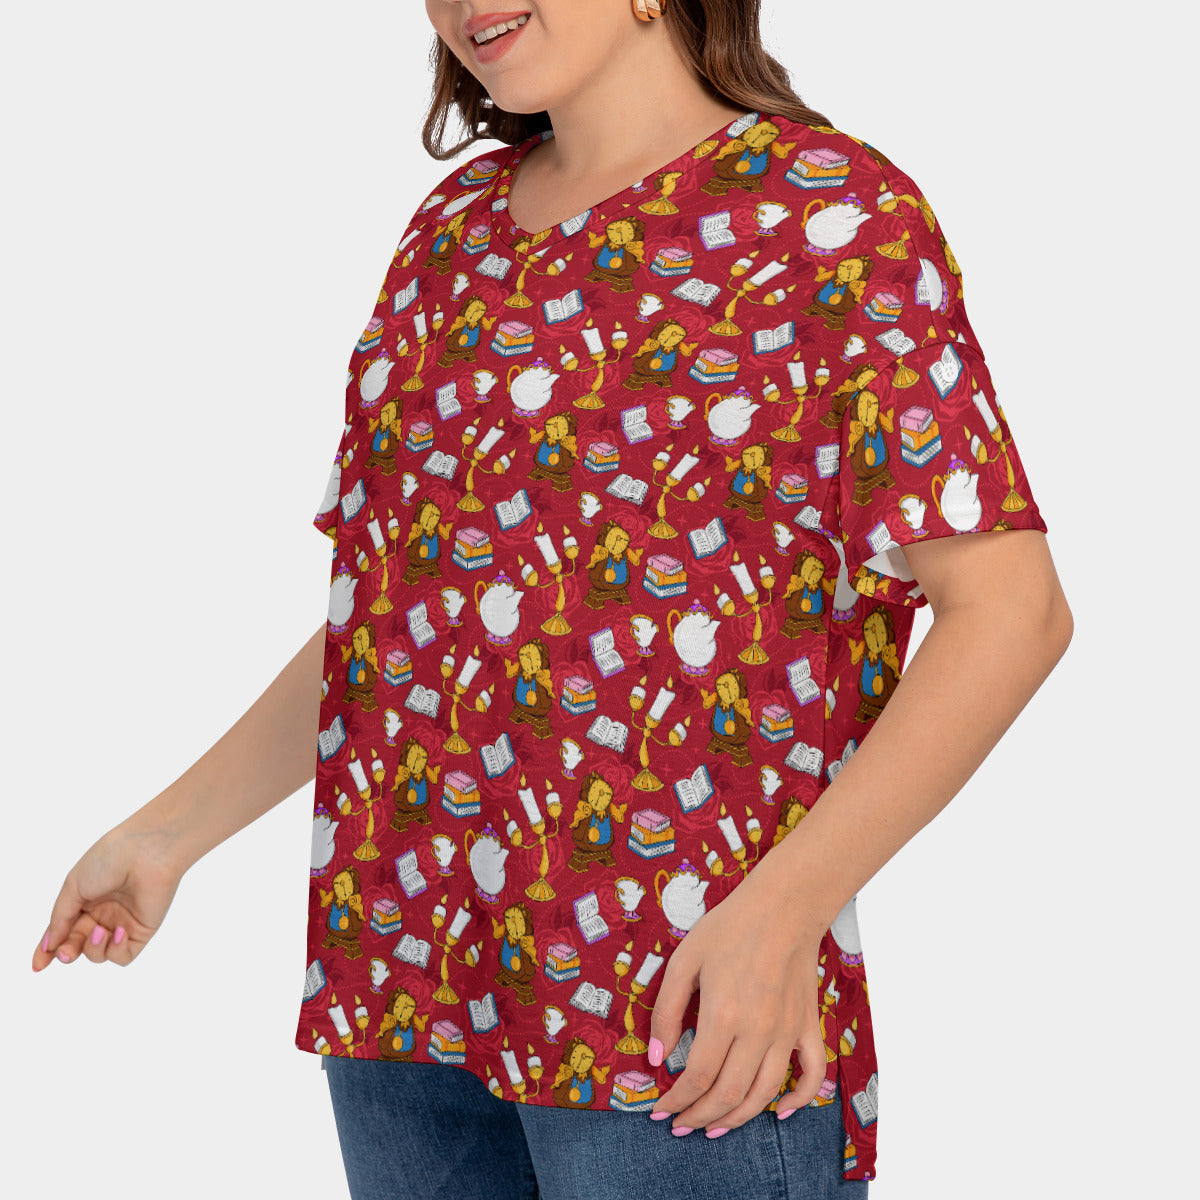 Belle's Friends Women's Plus Size Short Sleeve T-shirt With Sleeve Loops